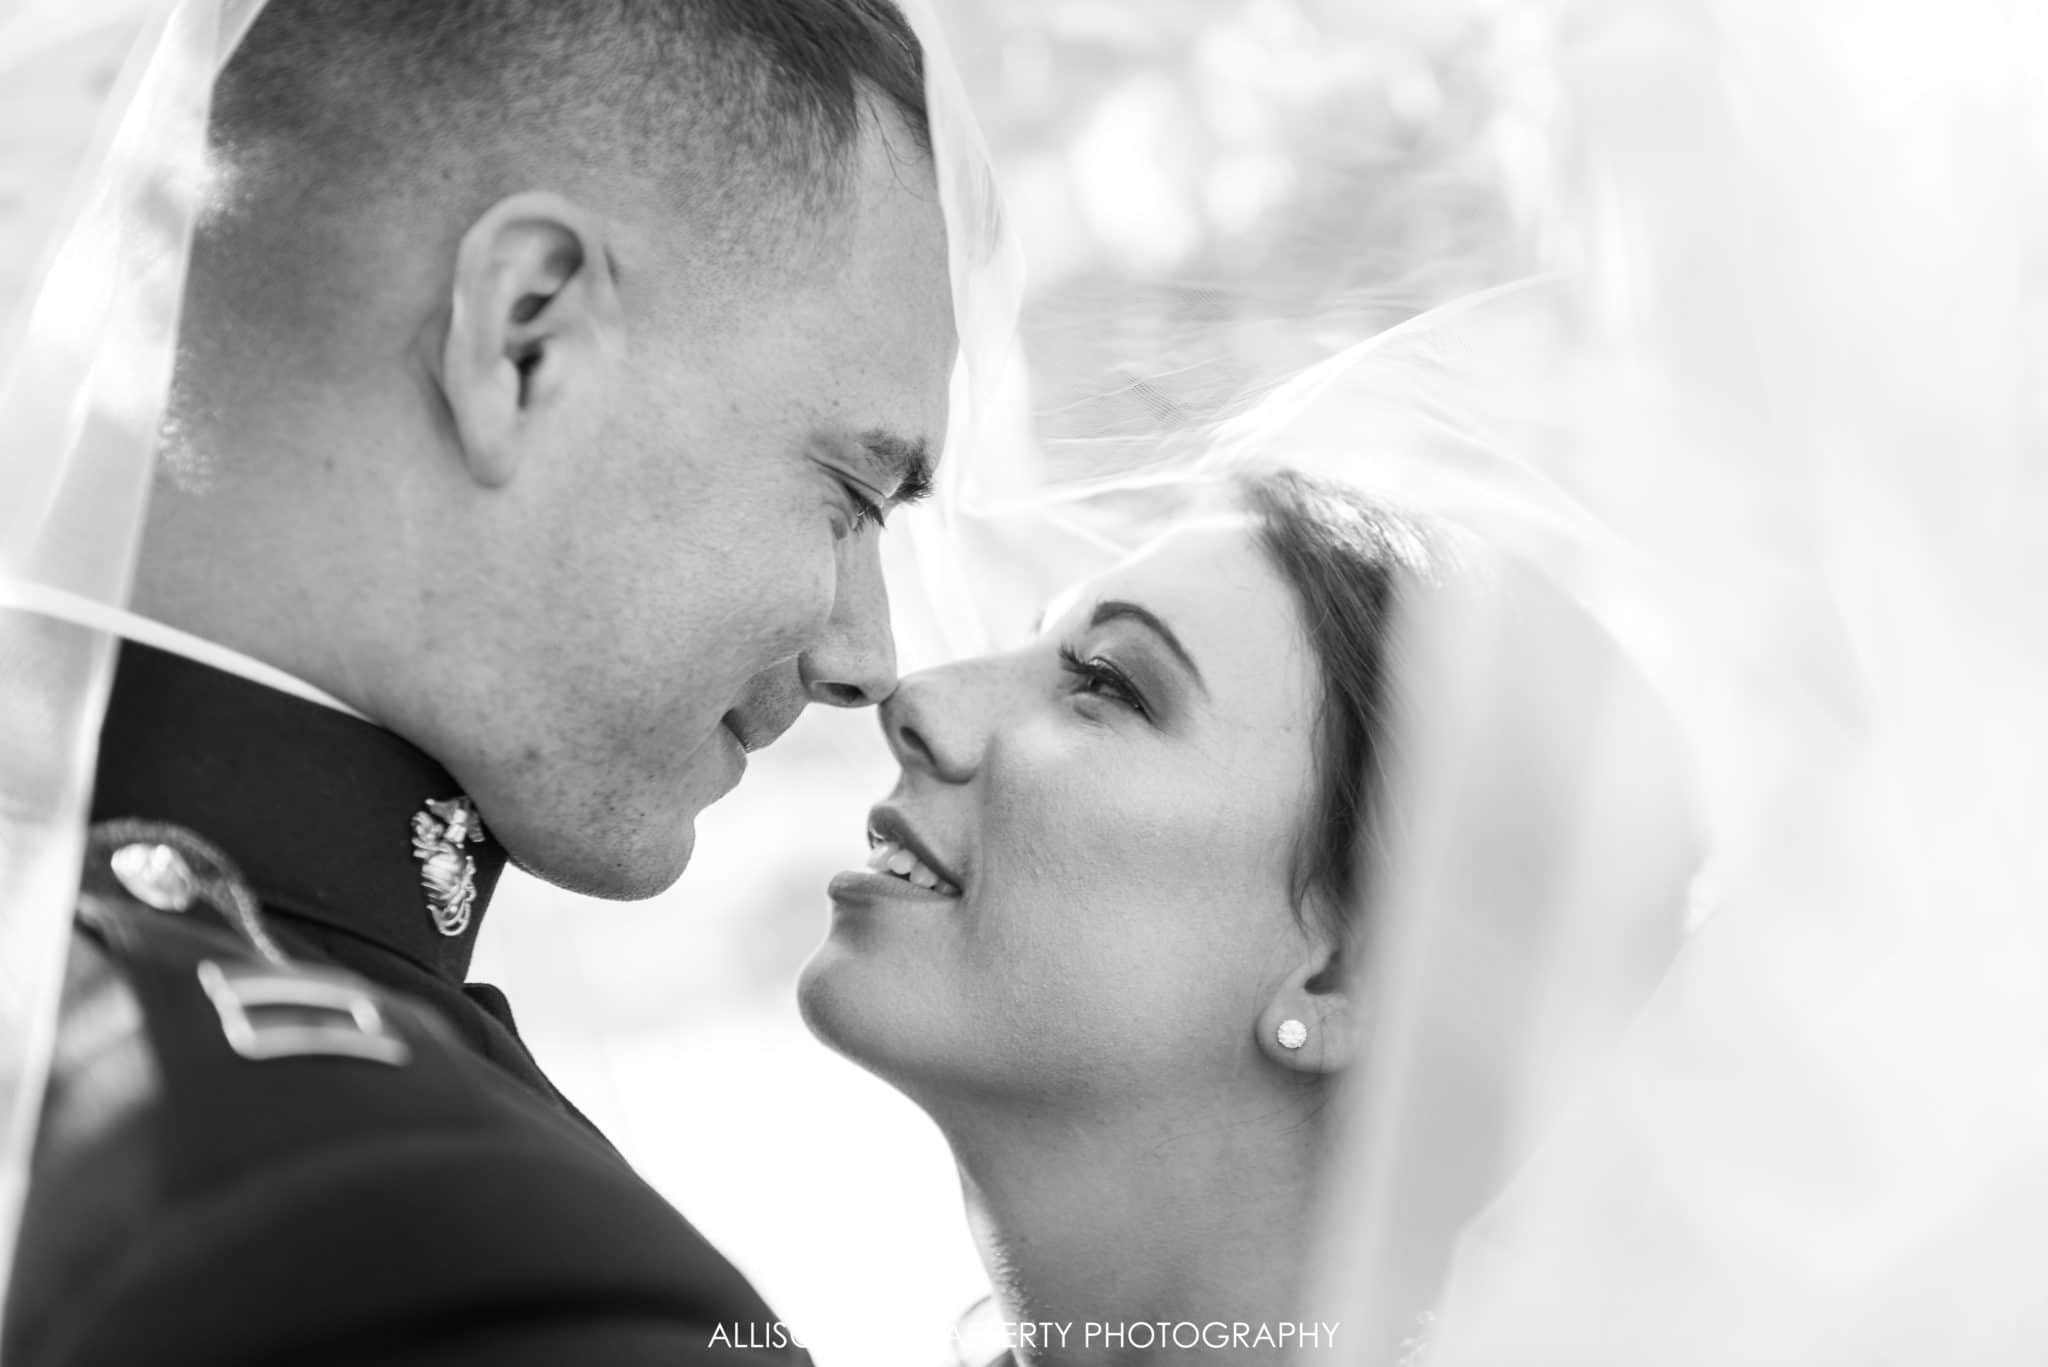 black and white photo of bride and groom under veil